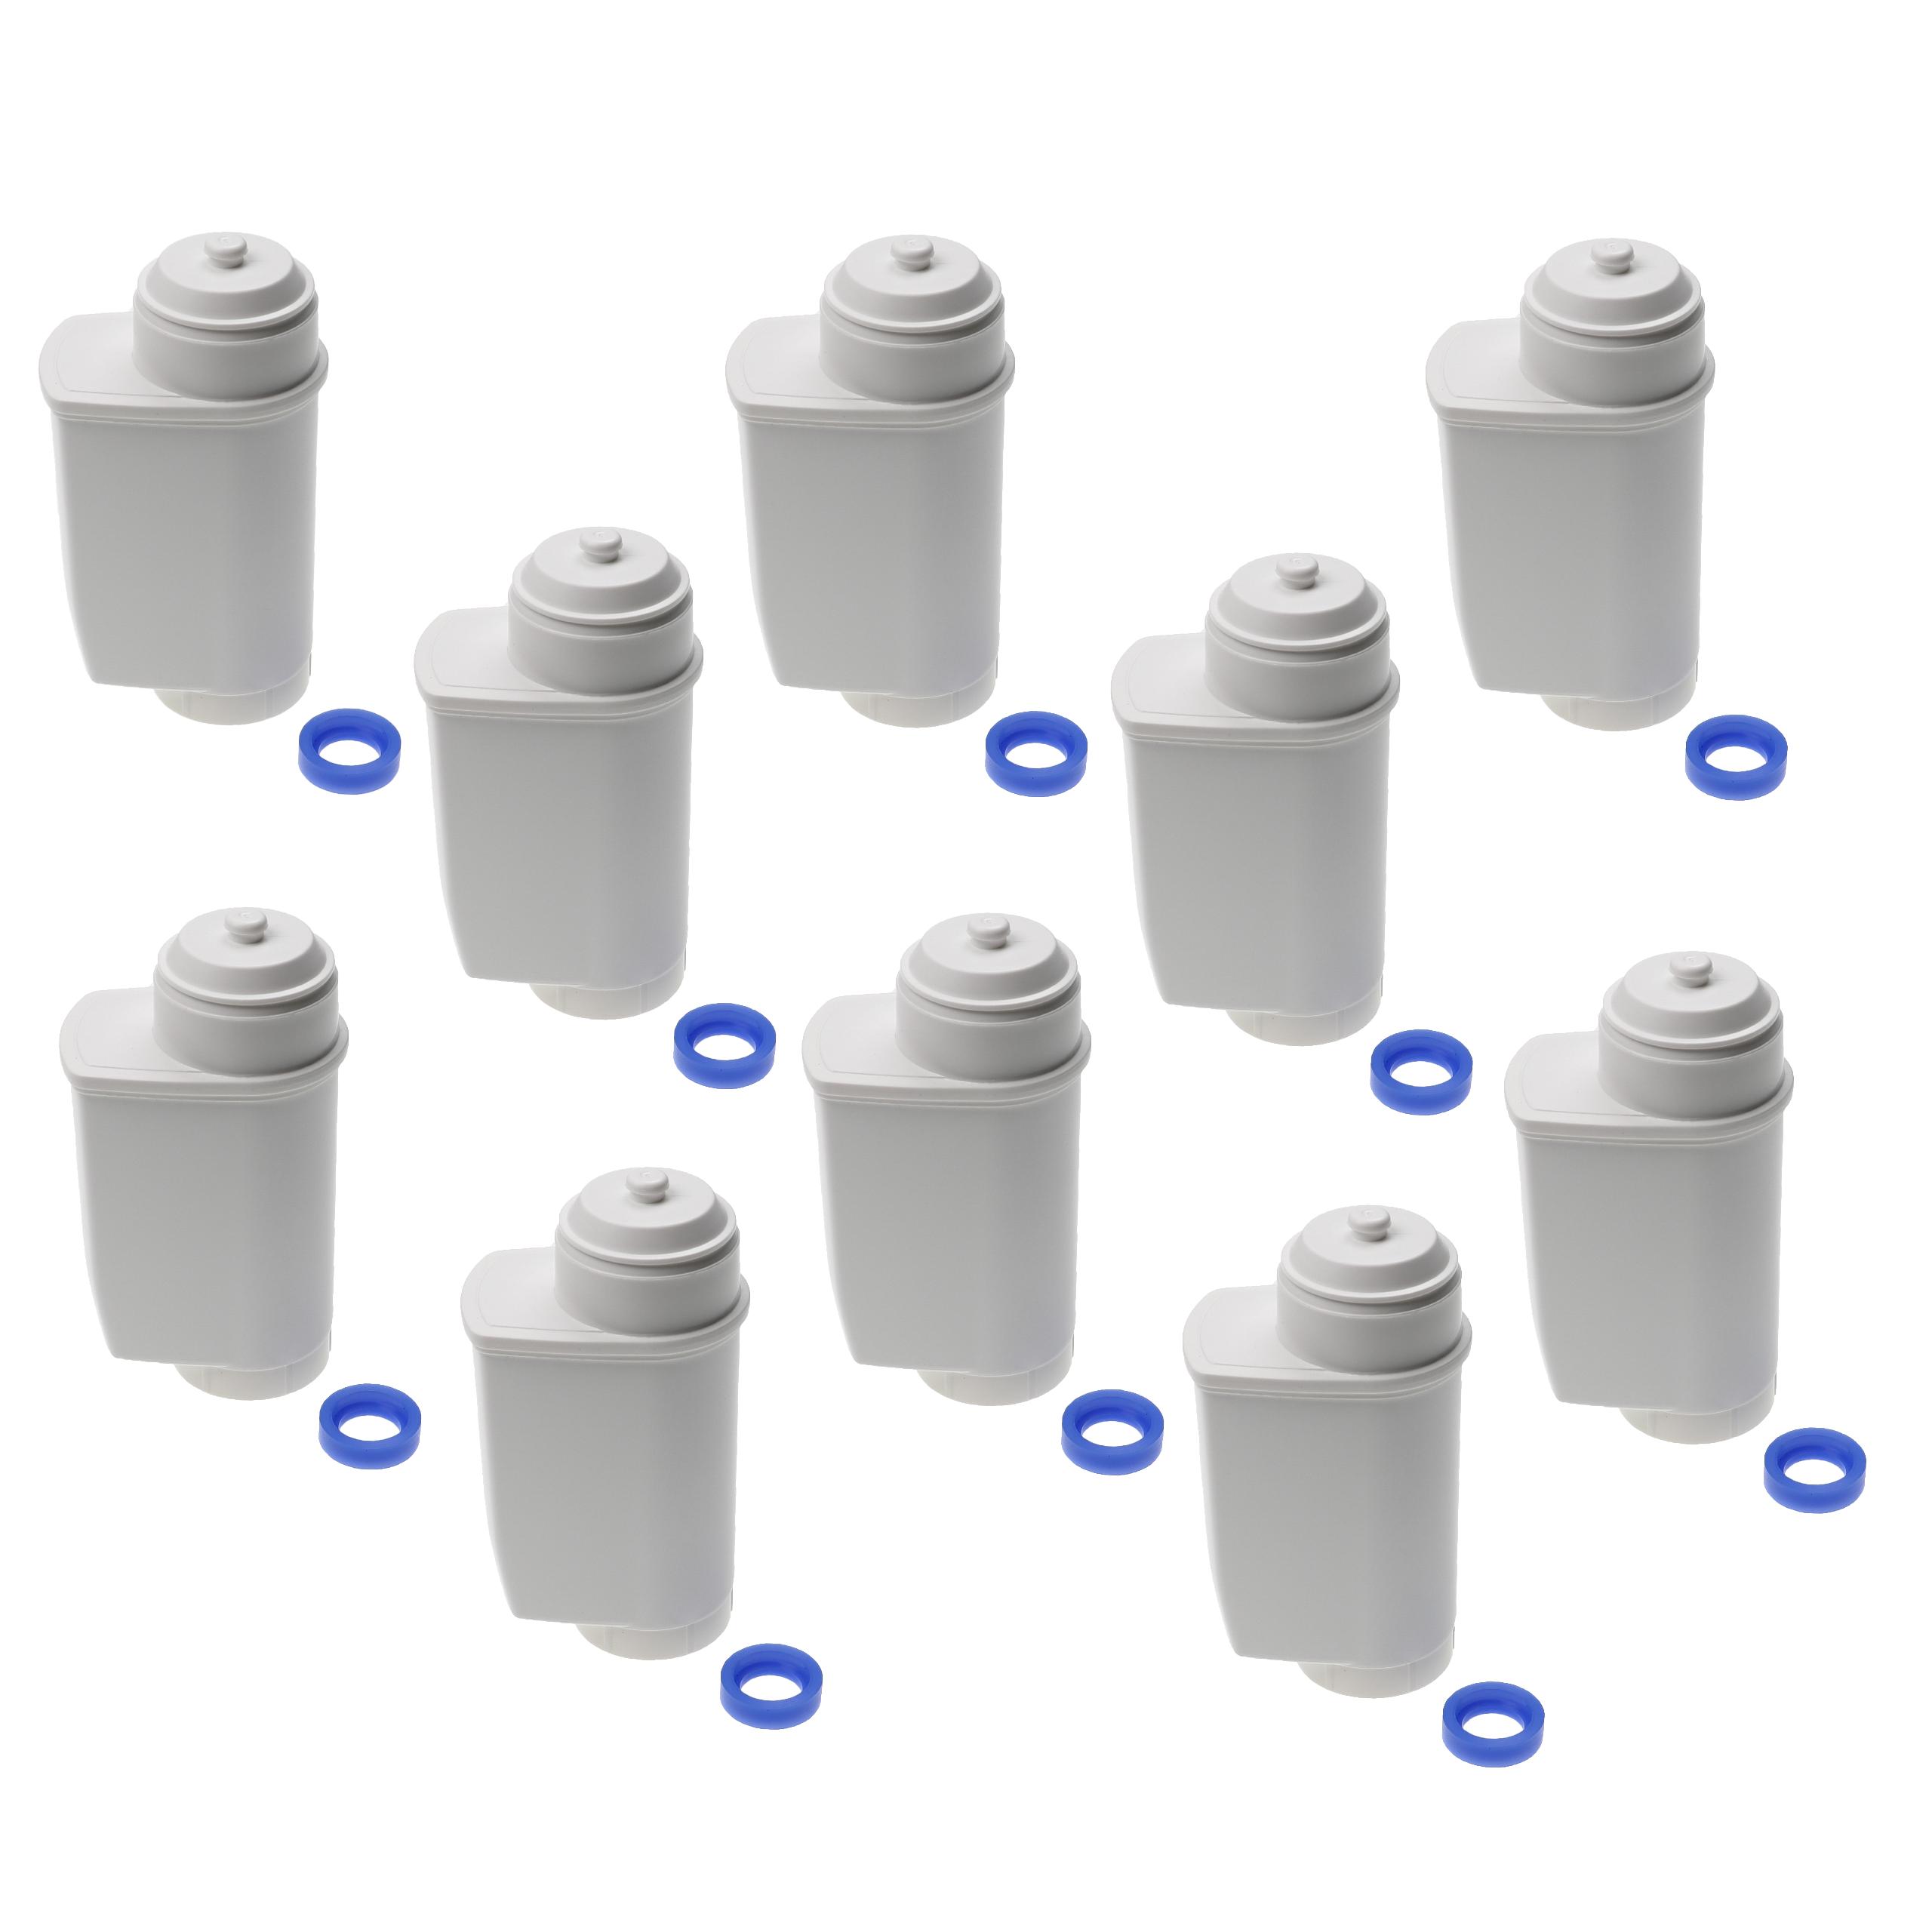 10x Water Filter replaces Siemens TZ70033 for Bosch Coffee Machine etc. - White